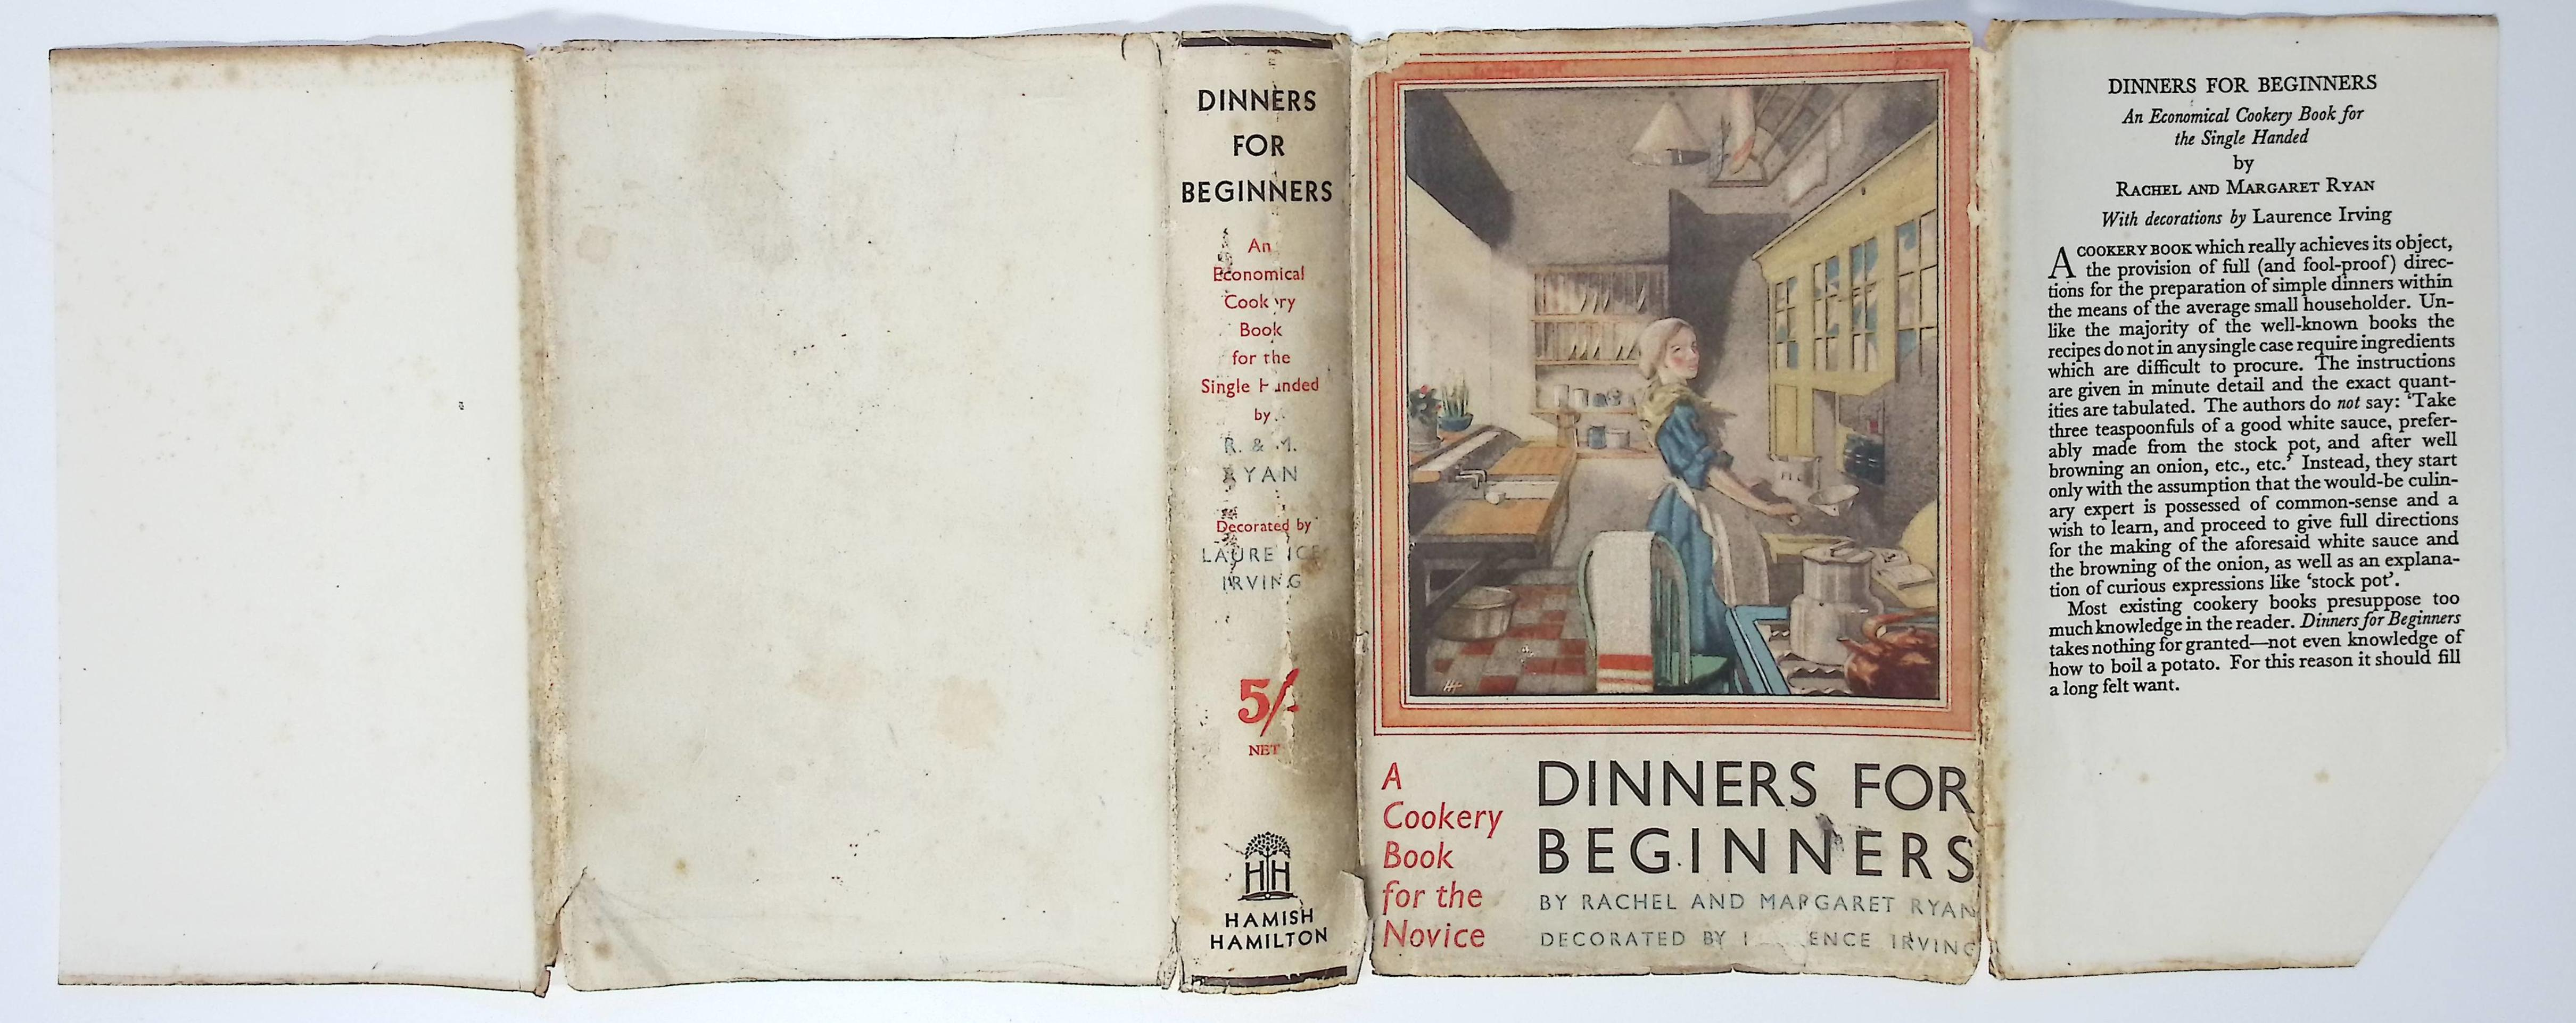 Dinners for Beginners. An Economical Cookery Book for the Single-Handed.